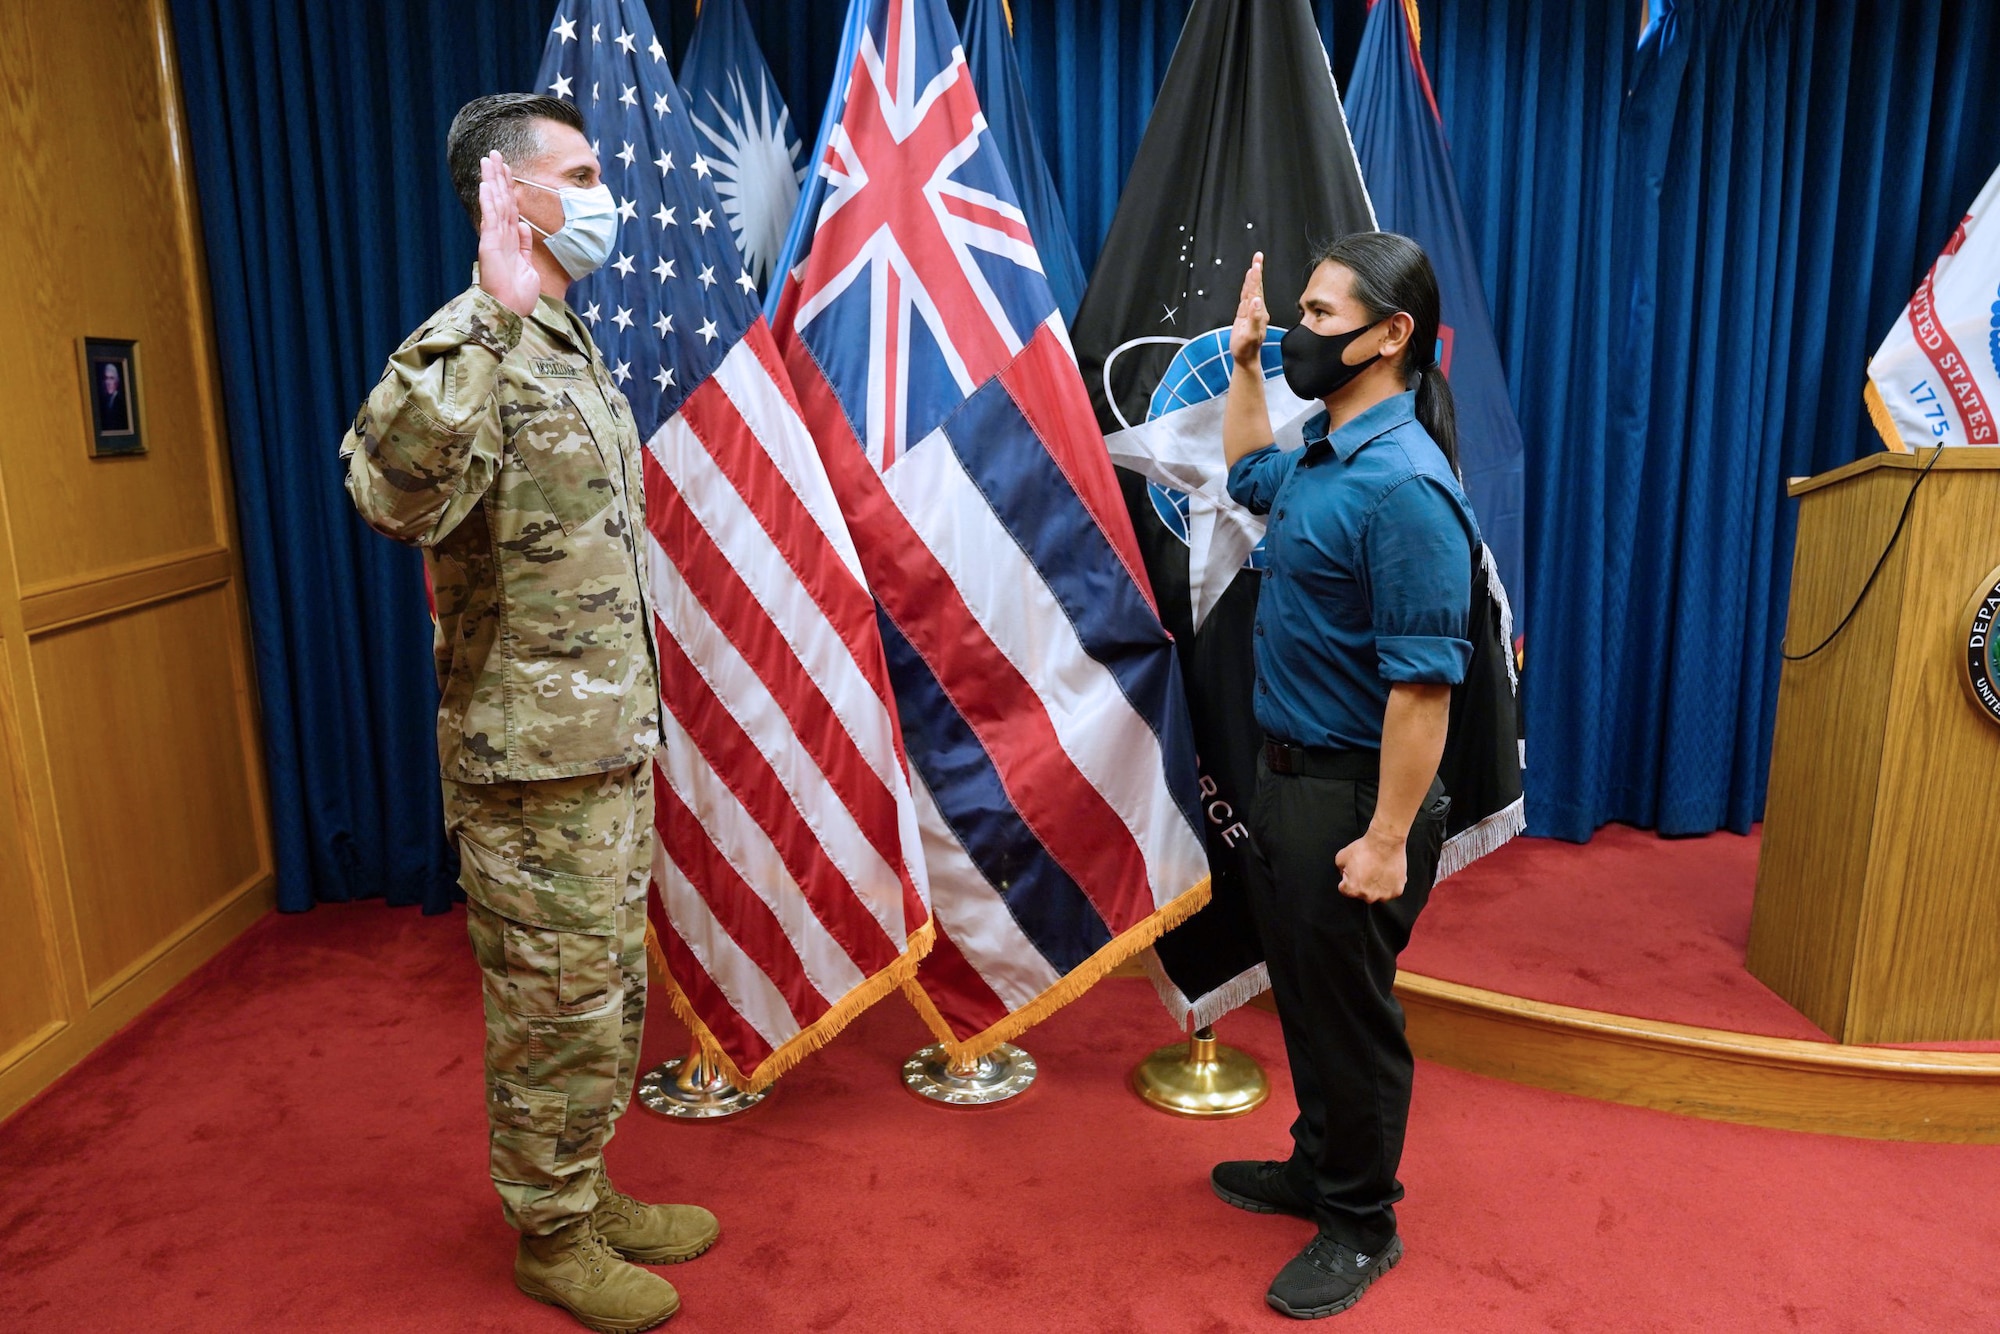 Reyjie Cliff Blando Madriaga, a Hawaiian native, receives the oath of enlistment from U.S. Army Capt. Donald McCoullough, Honolulu Military Entrance Processing Station Officer, as the first Hawaiian Space Force at Joint Base Pearl Harbor-Hickam, Hawaii, March 4, 2021. The oath of enlistment is a promise made by members of the United States Armed Forces to support and defend the Constitution.